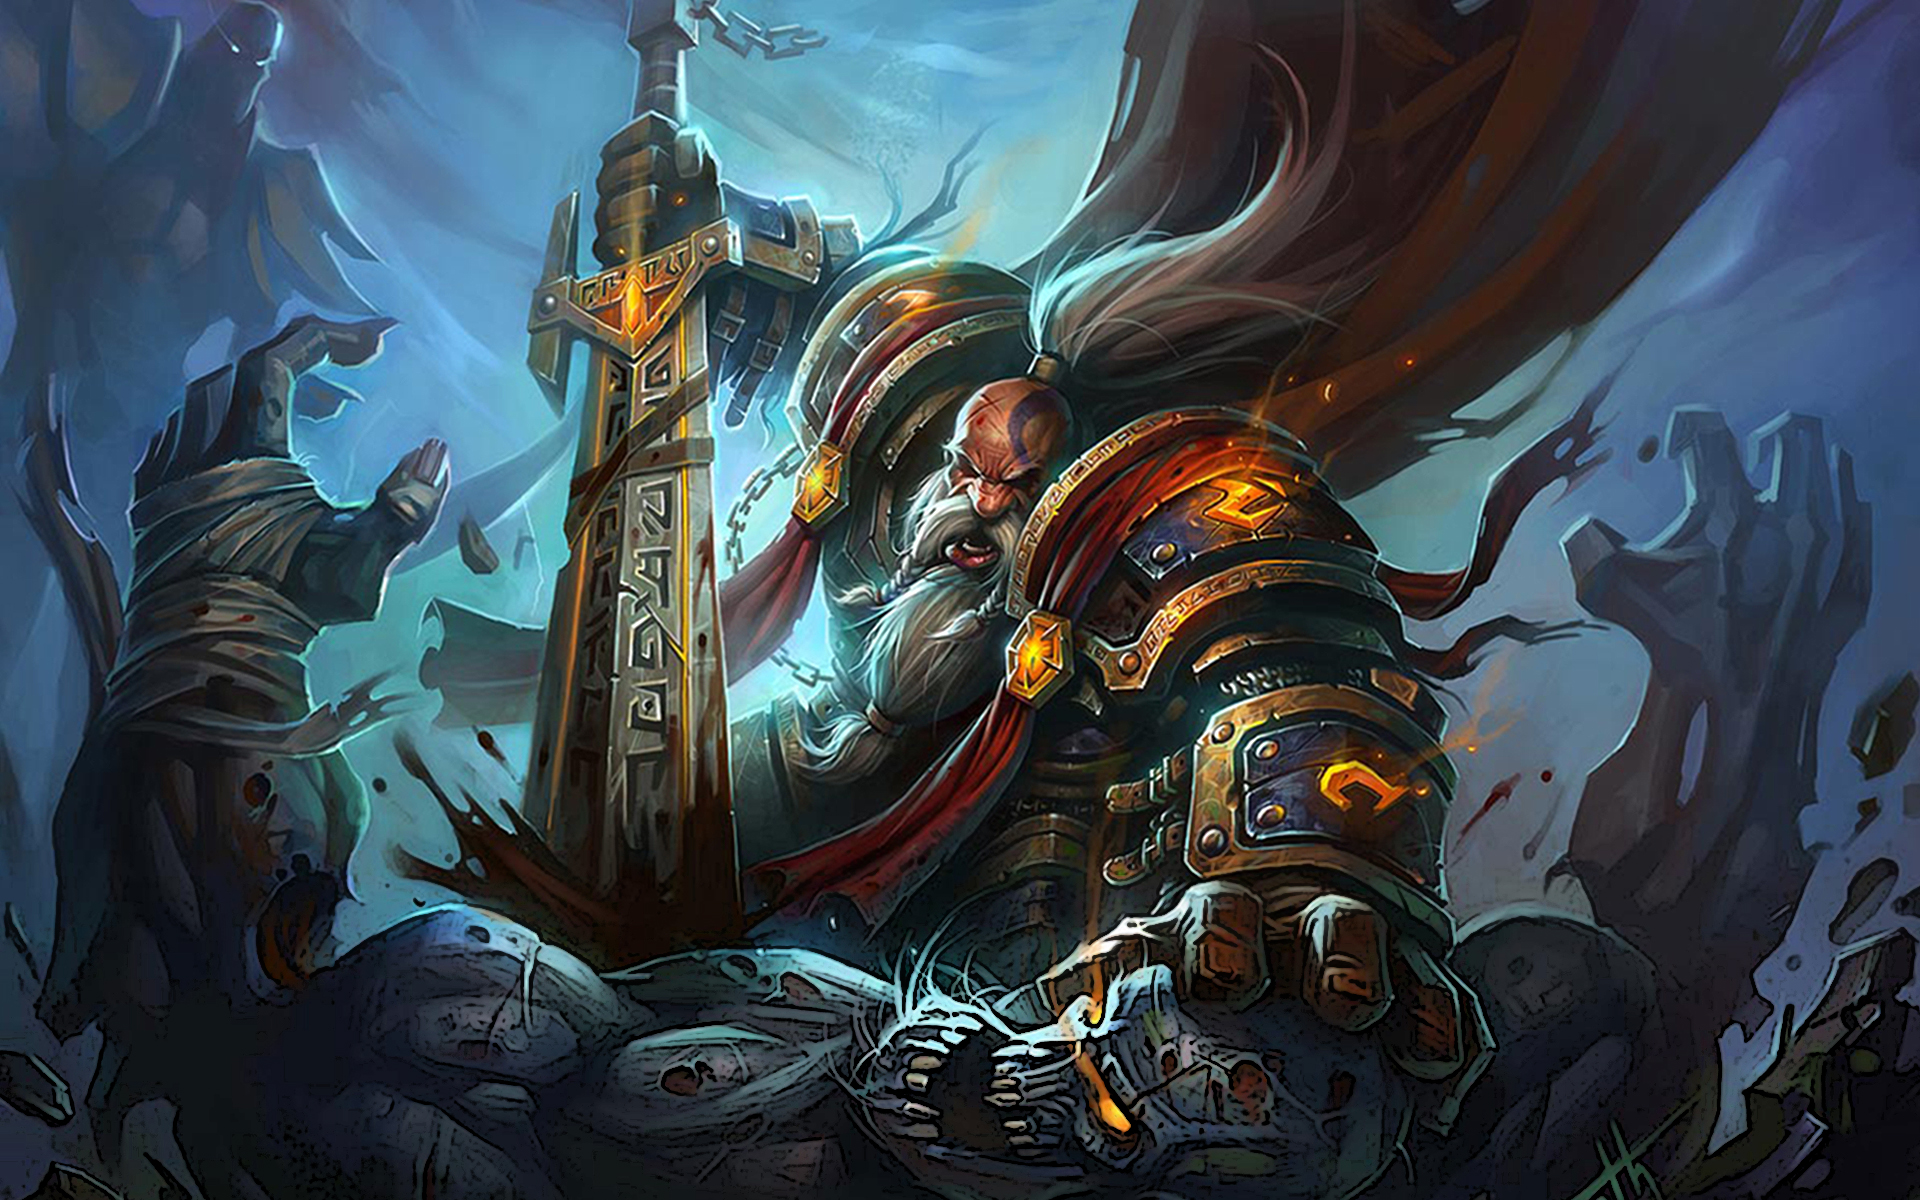 Large World of Warcraft Wallpapers ...